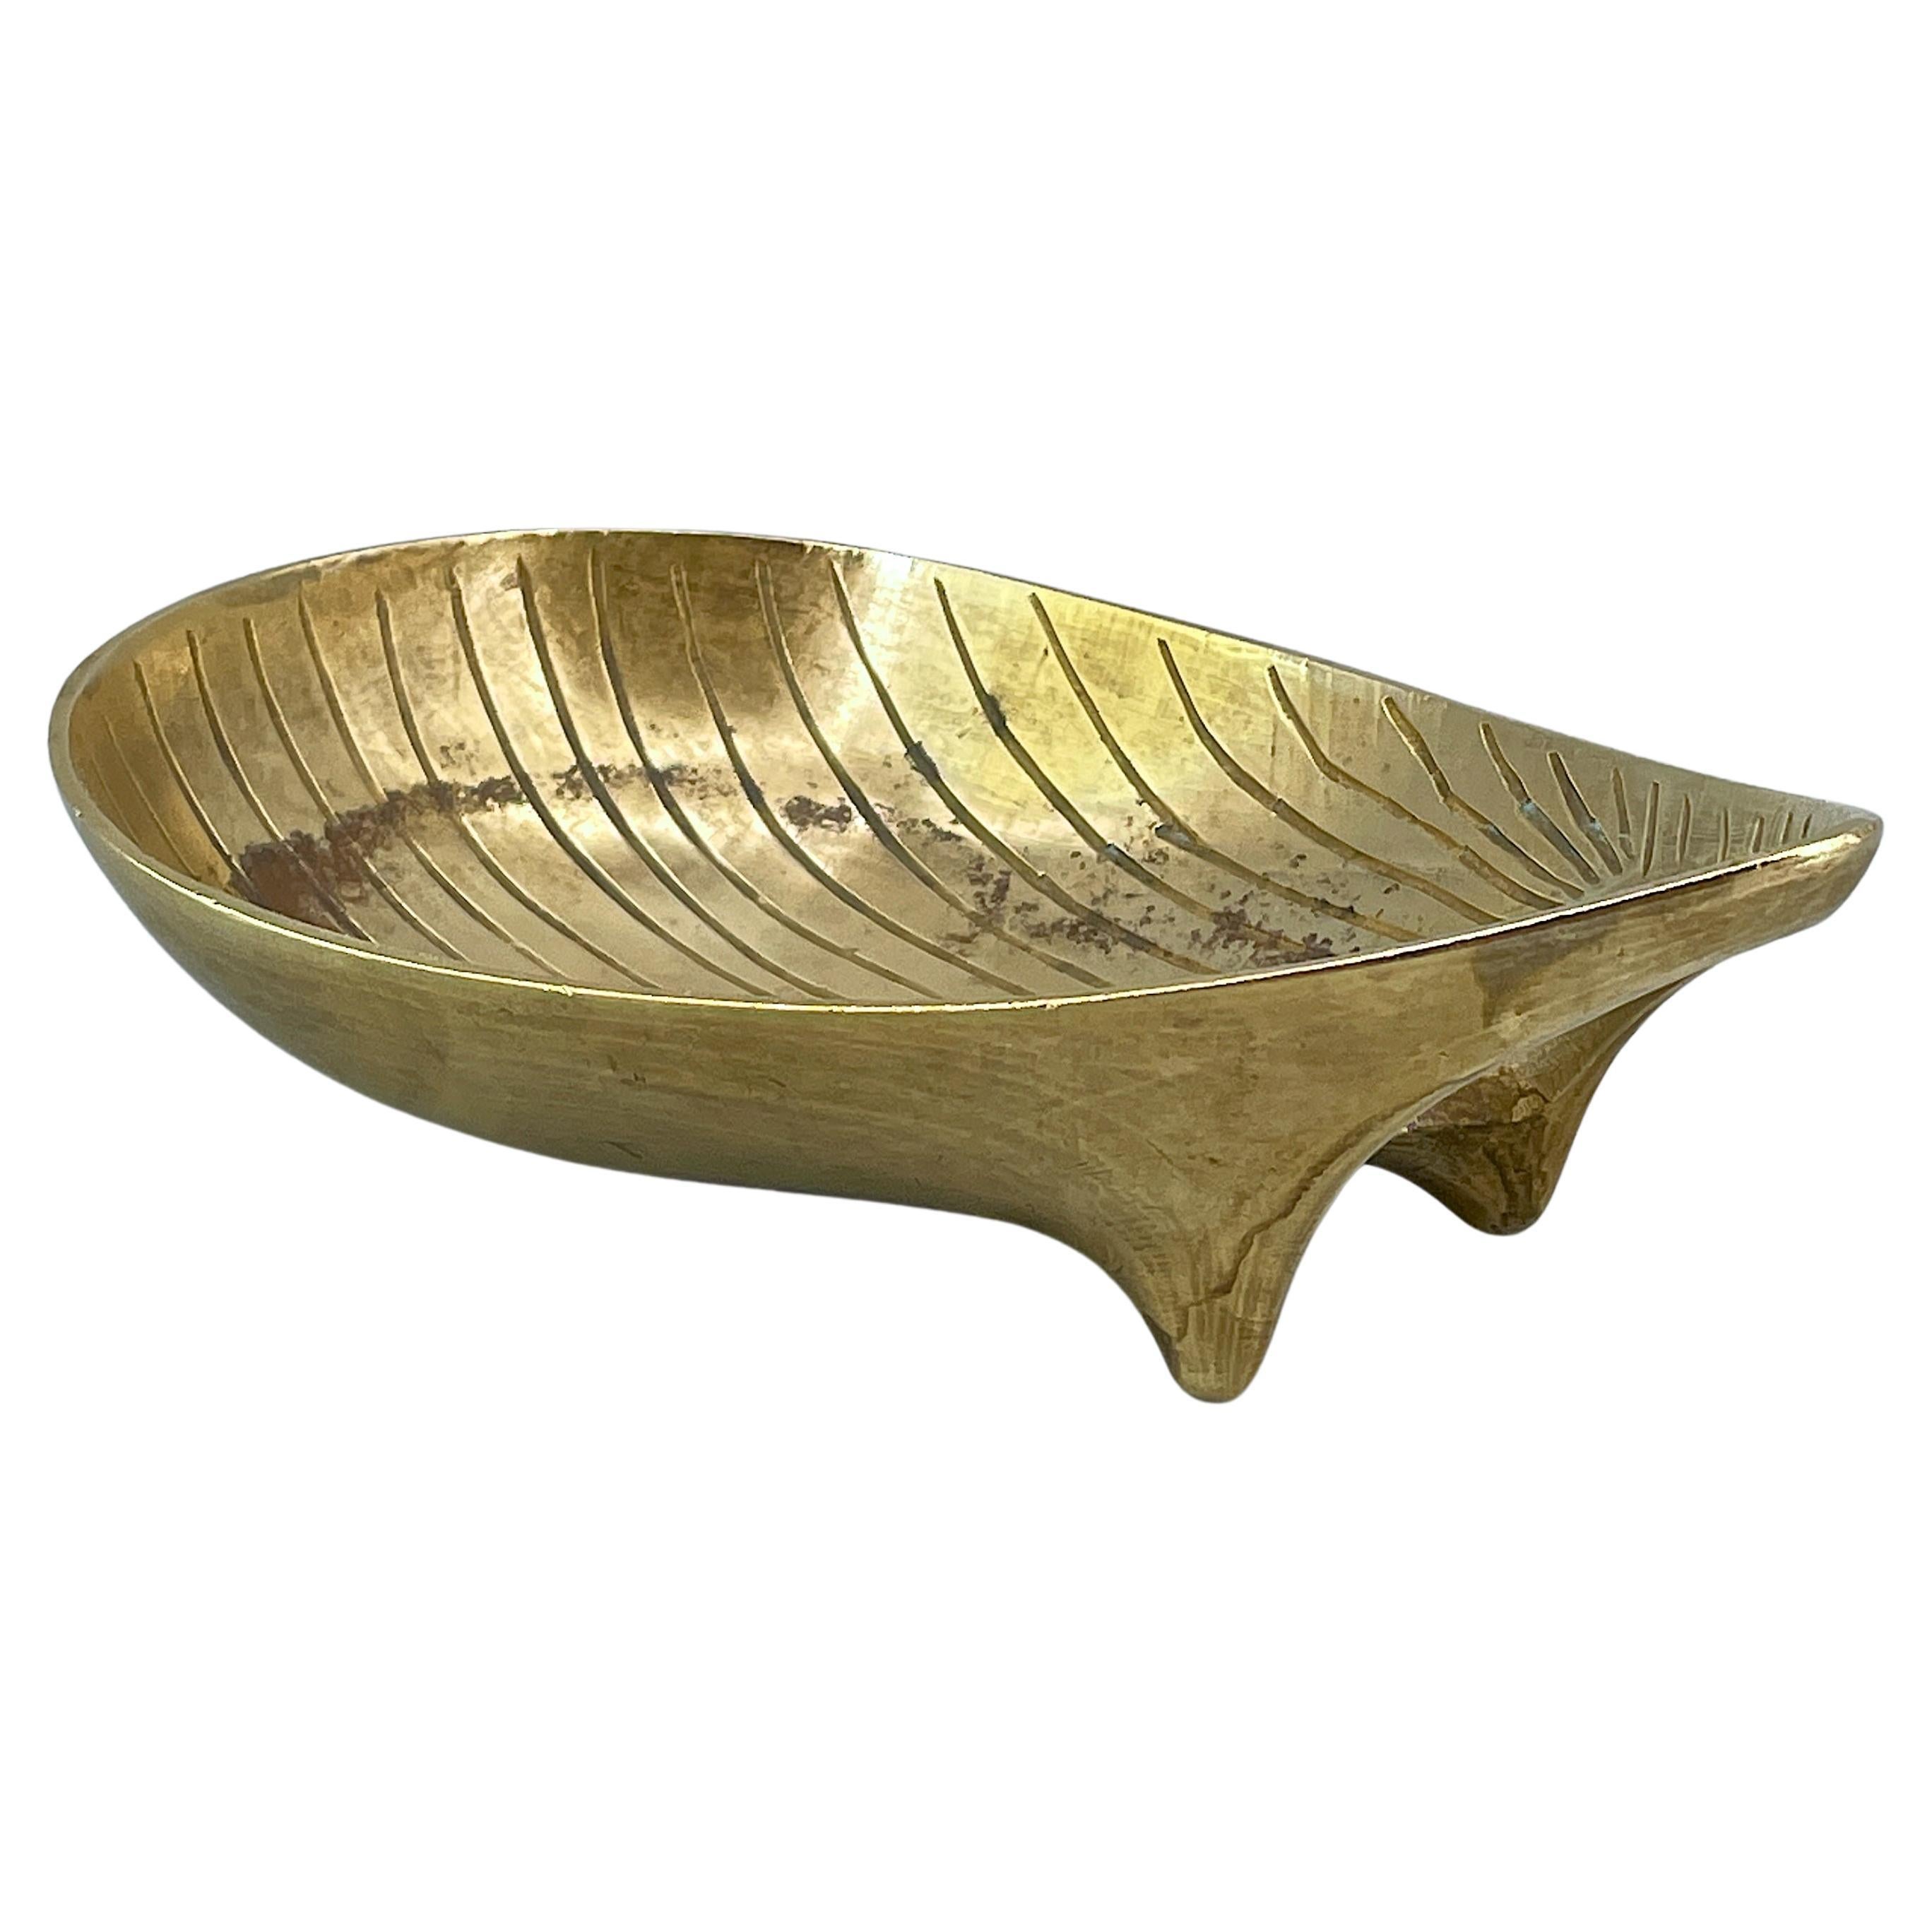 1960s, Biomorphic Sea Form Brass Table Dish For Sale